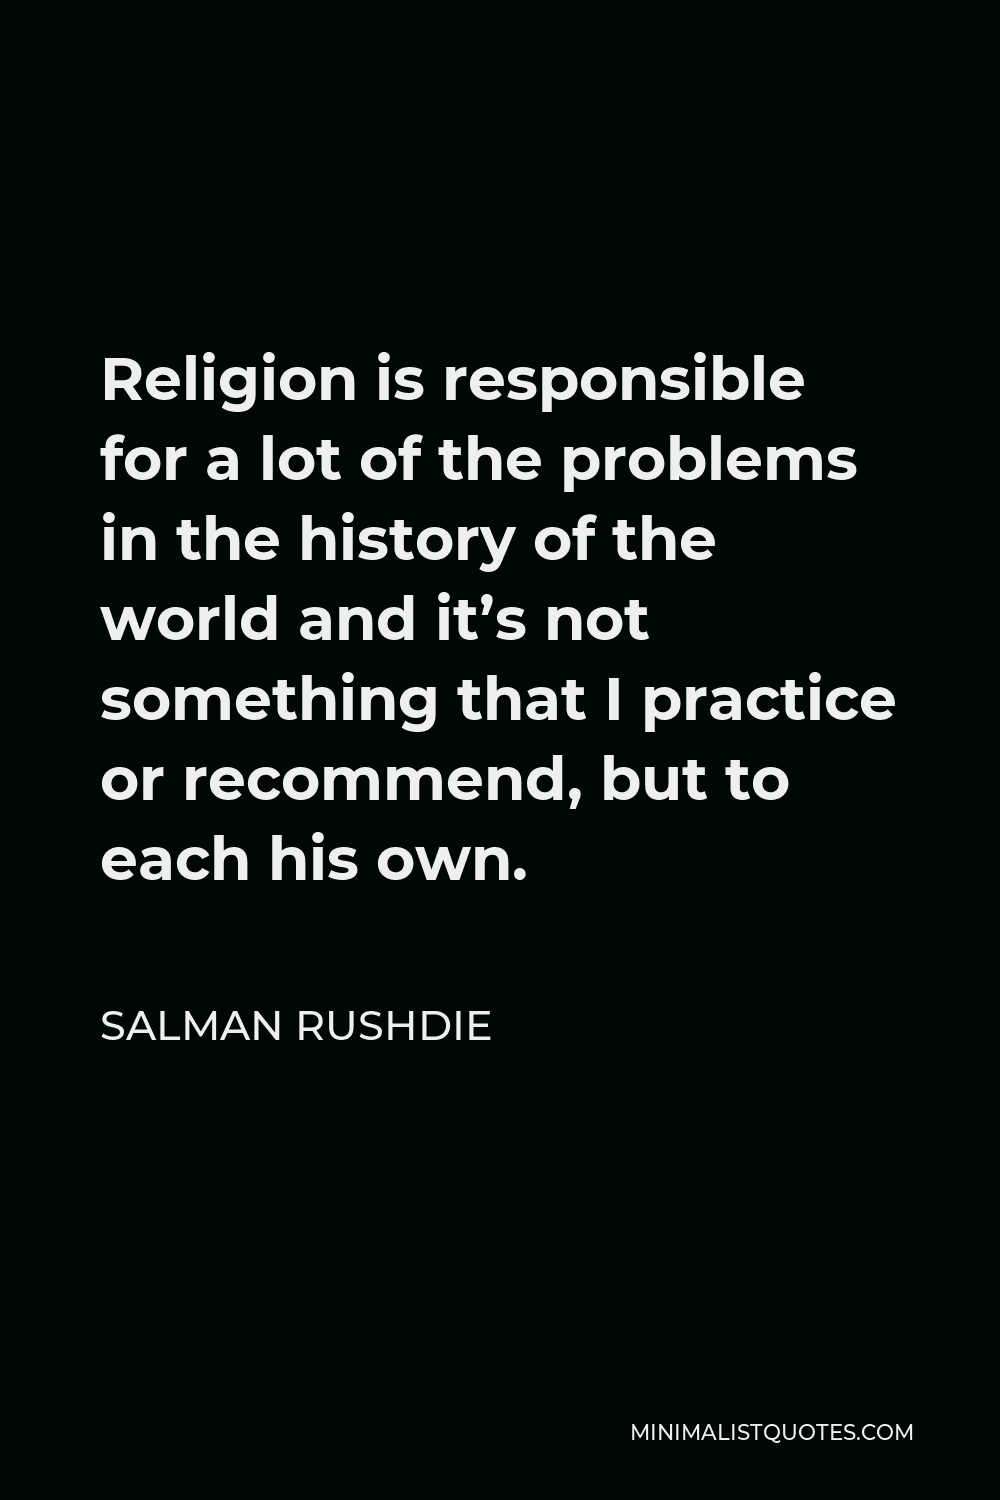 Salman Rushdie Quote - Religion is responsible for a lot of the problems in the history of the world and it’s not something that I practice or recommend, but to each his own.